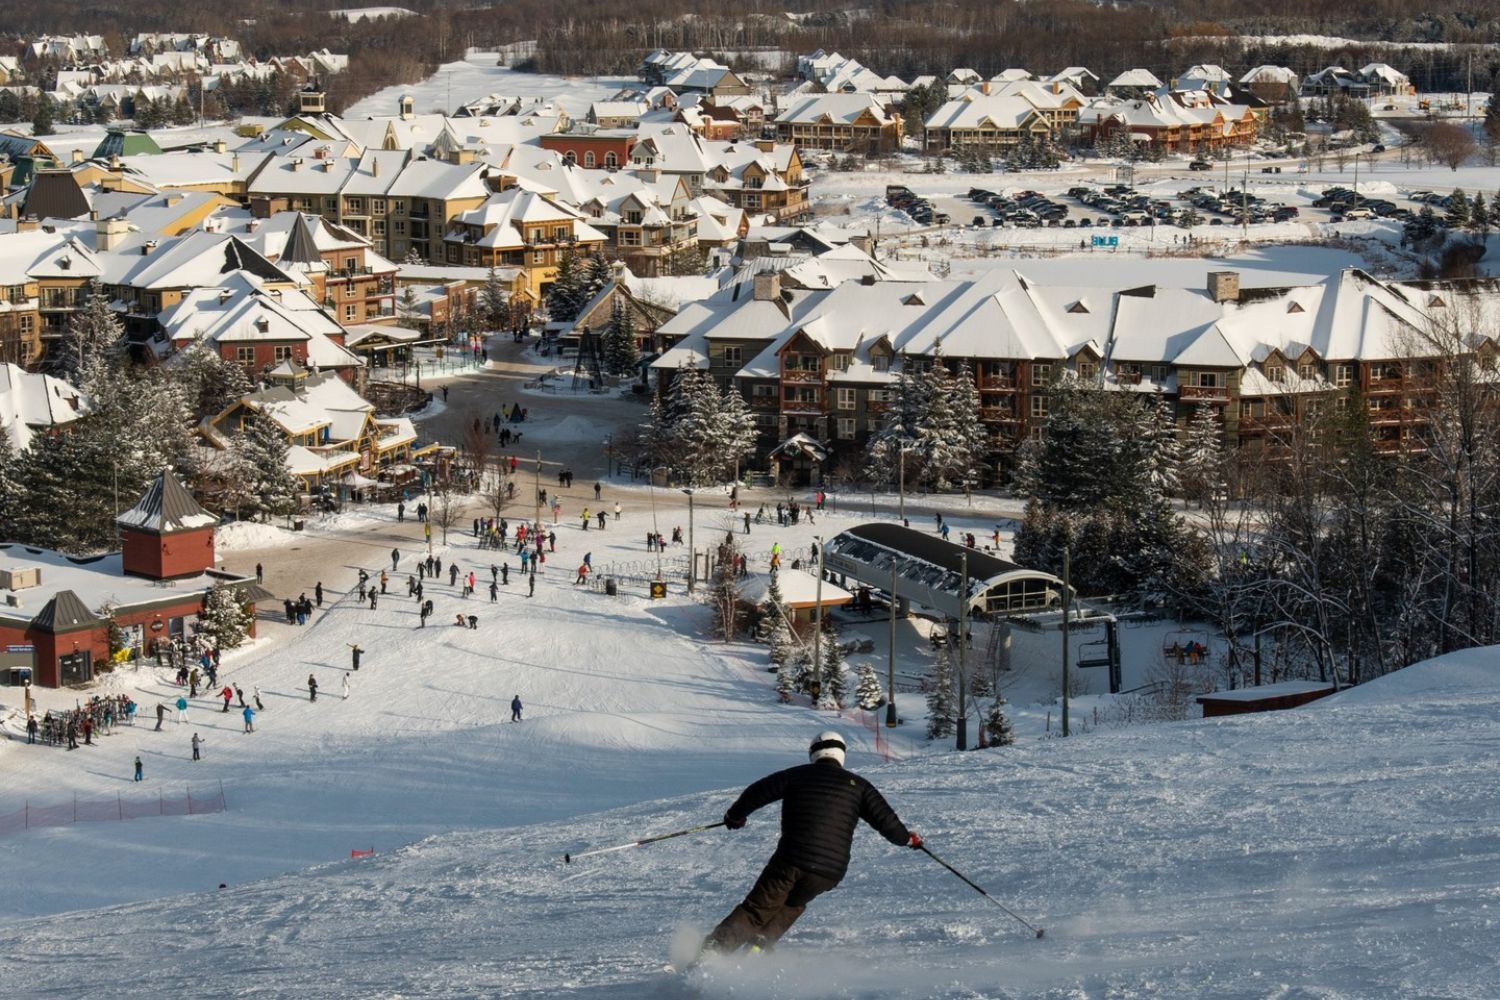 Air Canada Pop-Up at Blue Mountain is gifting away 4 flight tickets